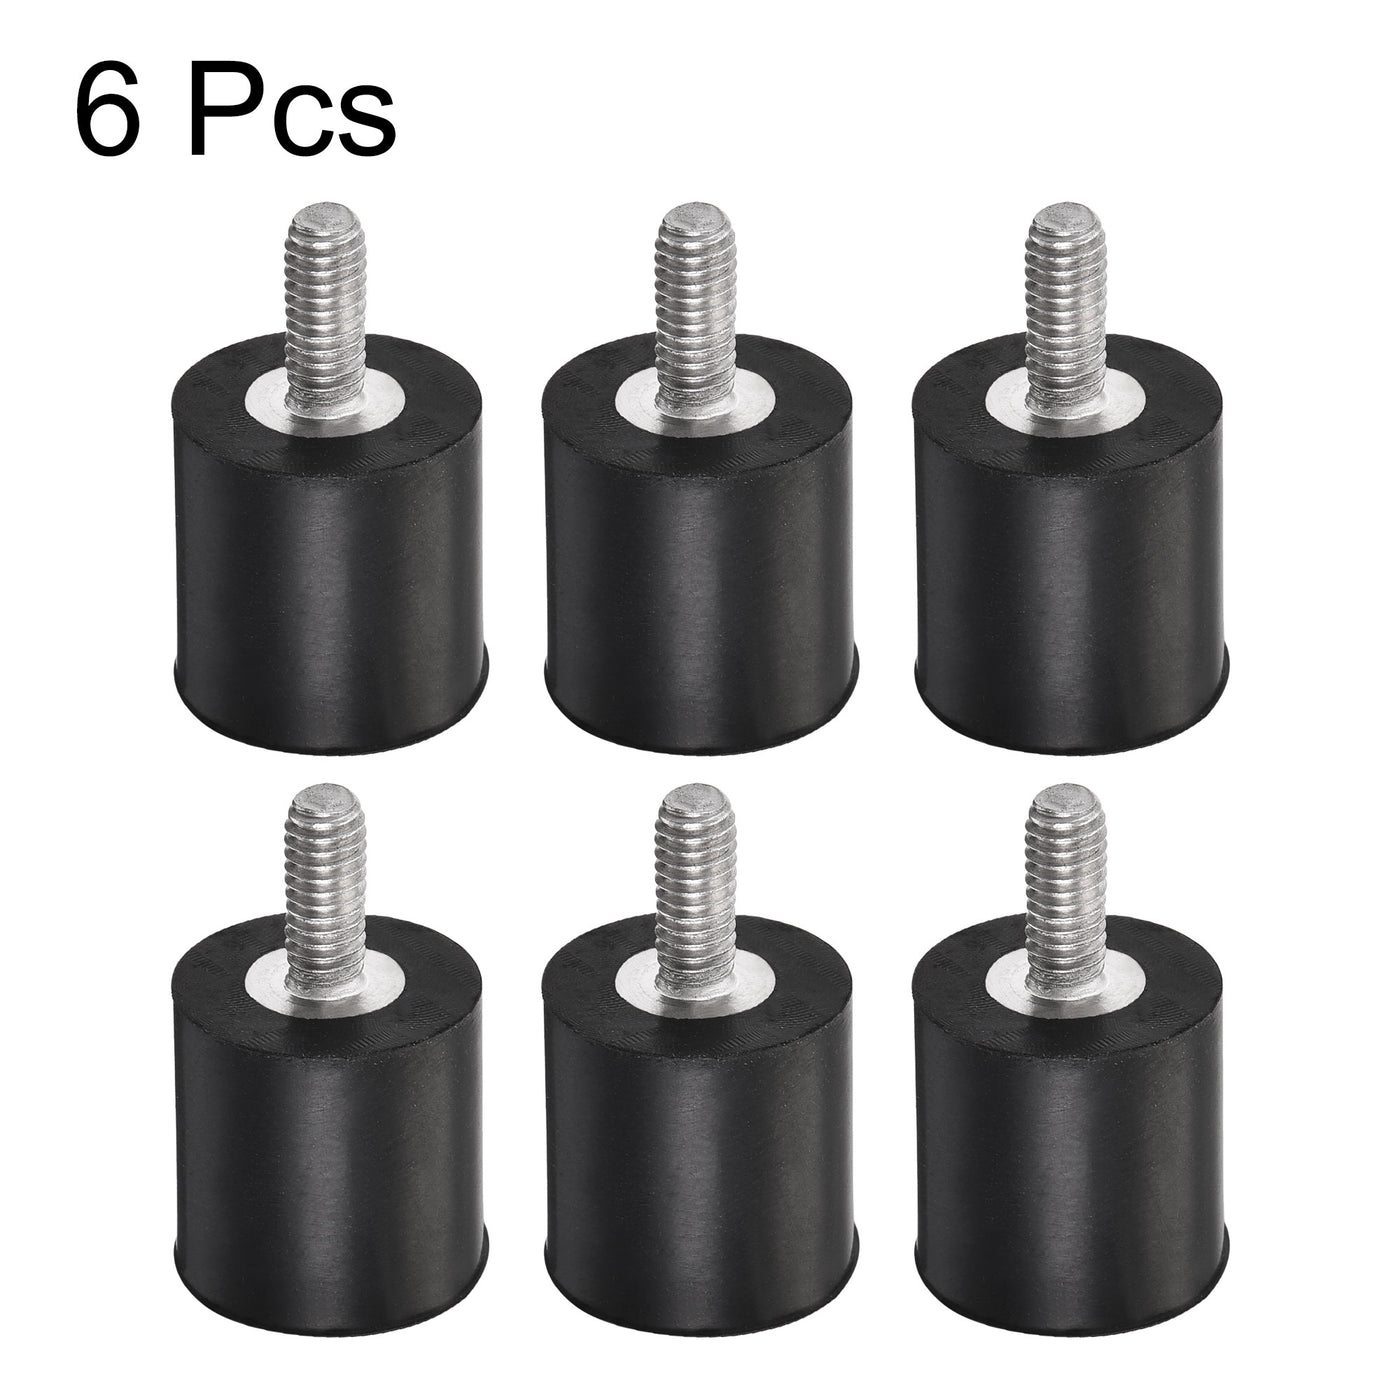 uxcell Uxcell M4 Rubber Mounts, 6pcs Male Thread Shock Absorber, D15mmxH15mm